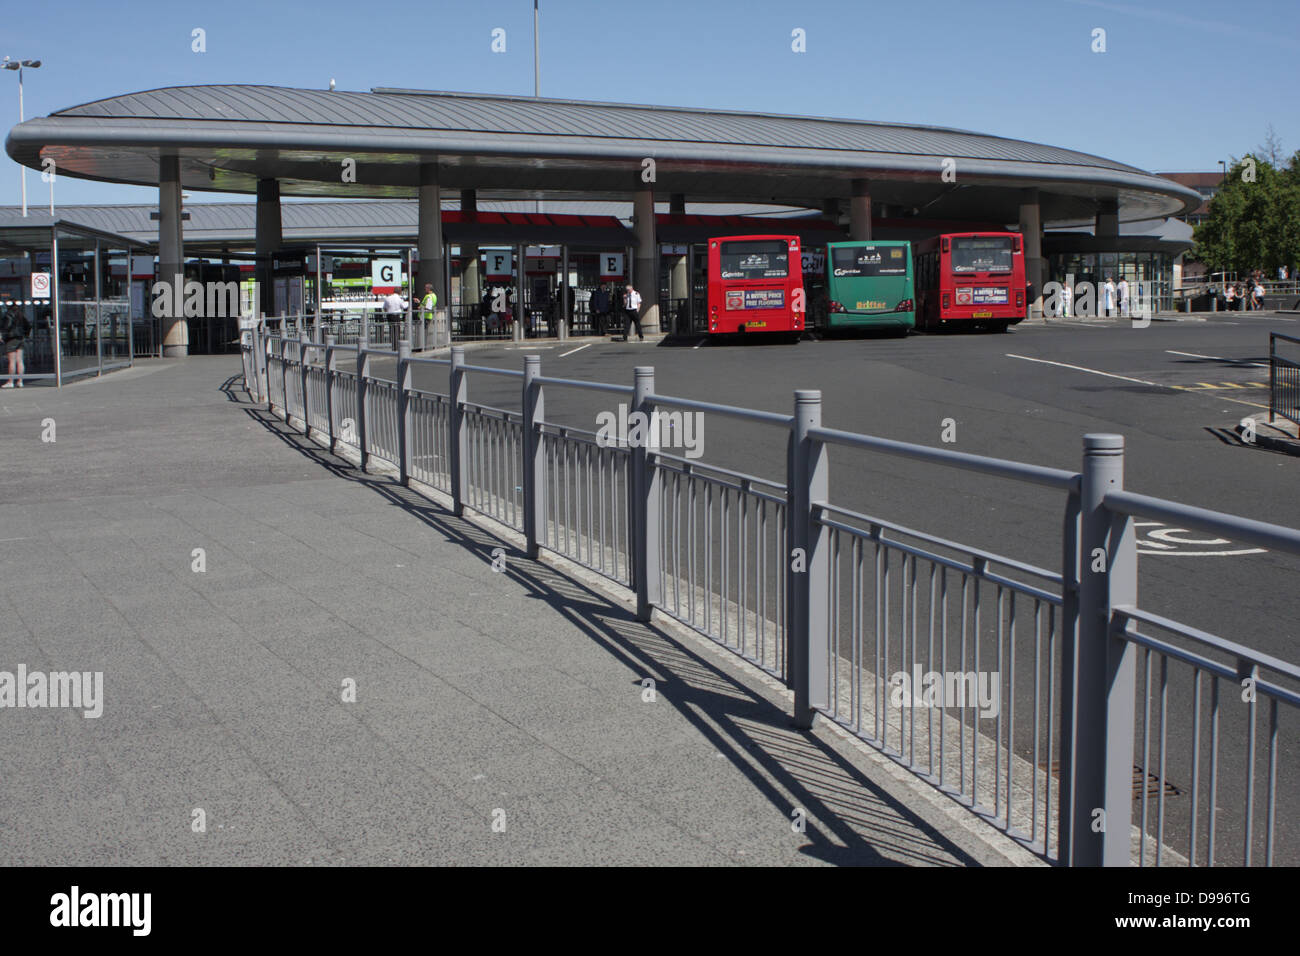 Park lane bus station, sundeland. Shows buses and people. Stock Photo